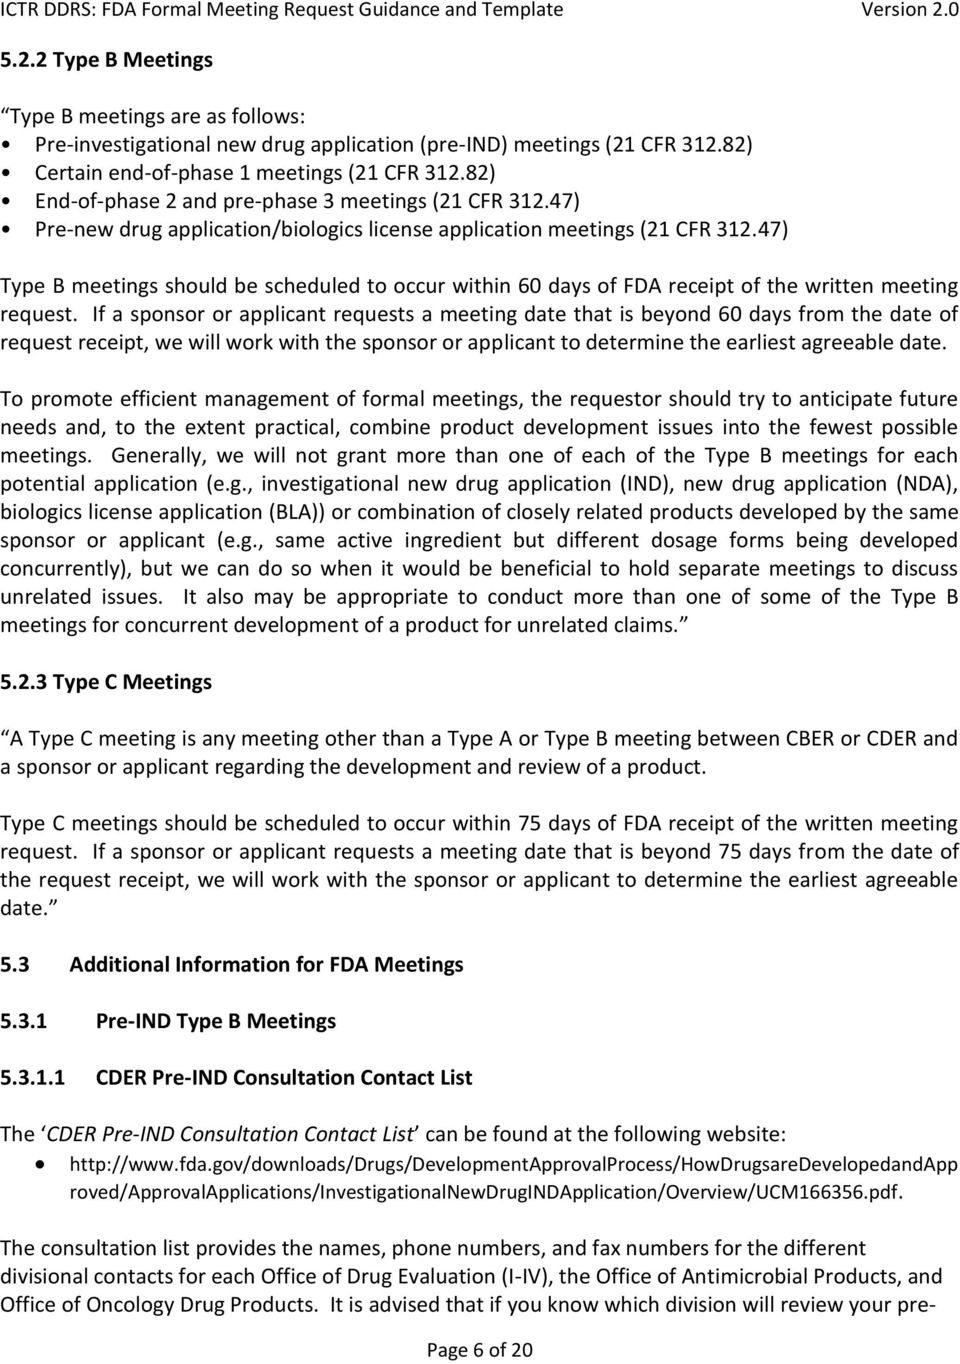 Formal Fda Meeting Request Guidance And Template Pdf Free with regard to measurements 960 X 1364